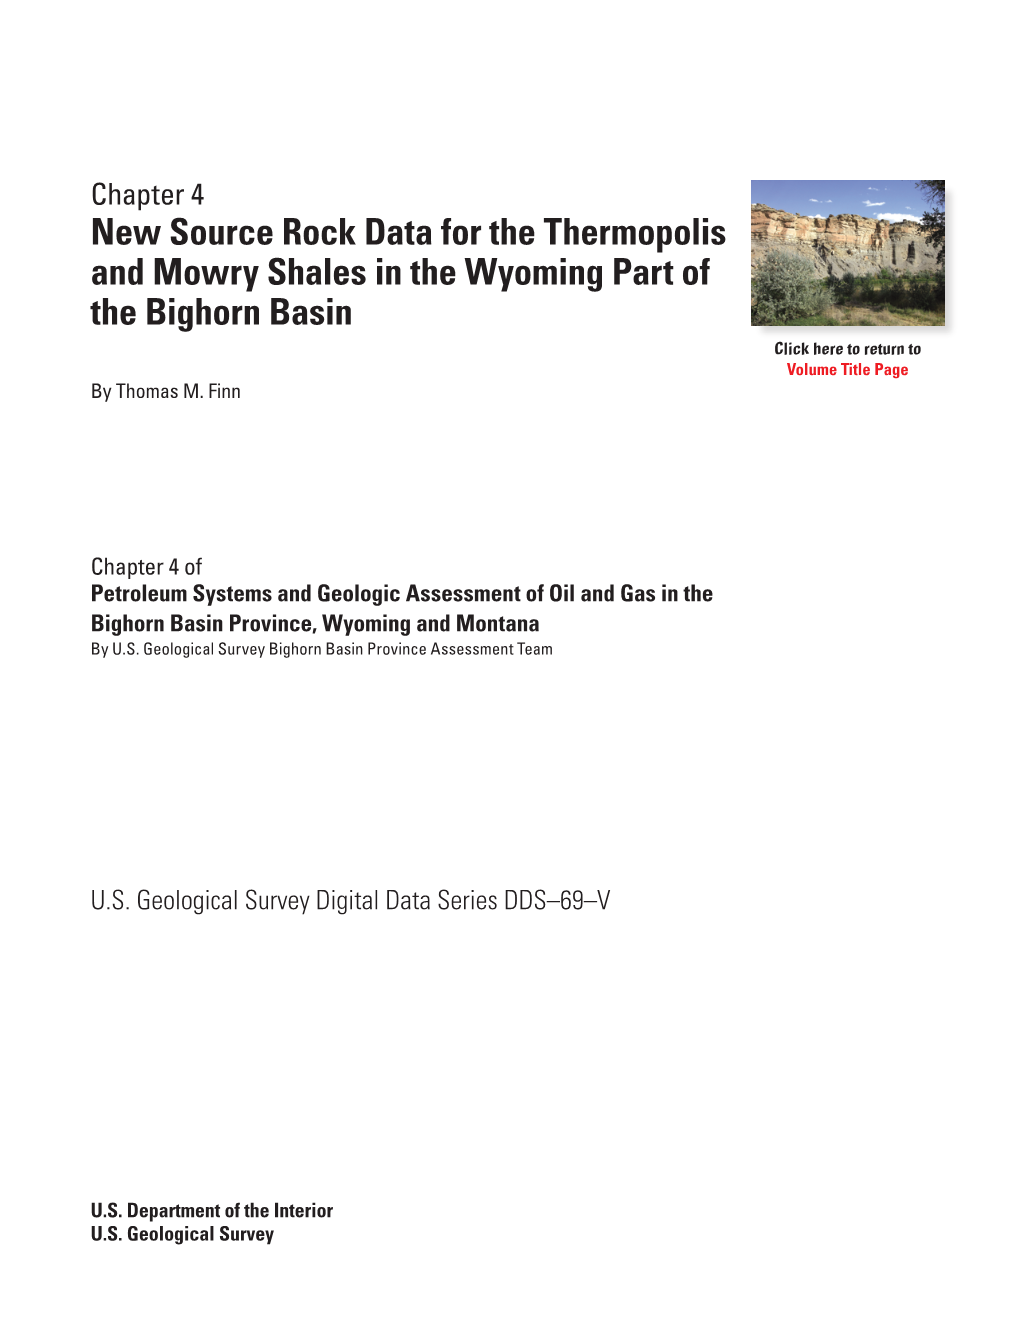 New Source Rock Data for the Thermopolis and Mowry Shales in the Wyoming Part of the Bighorn Basin Click Here to Return to Volume Title Page by Thomas M